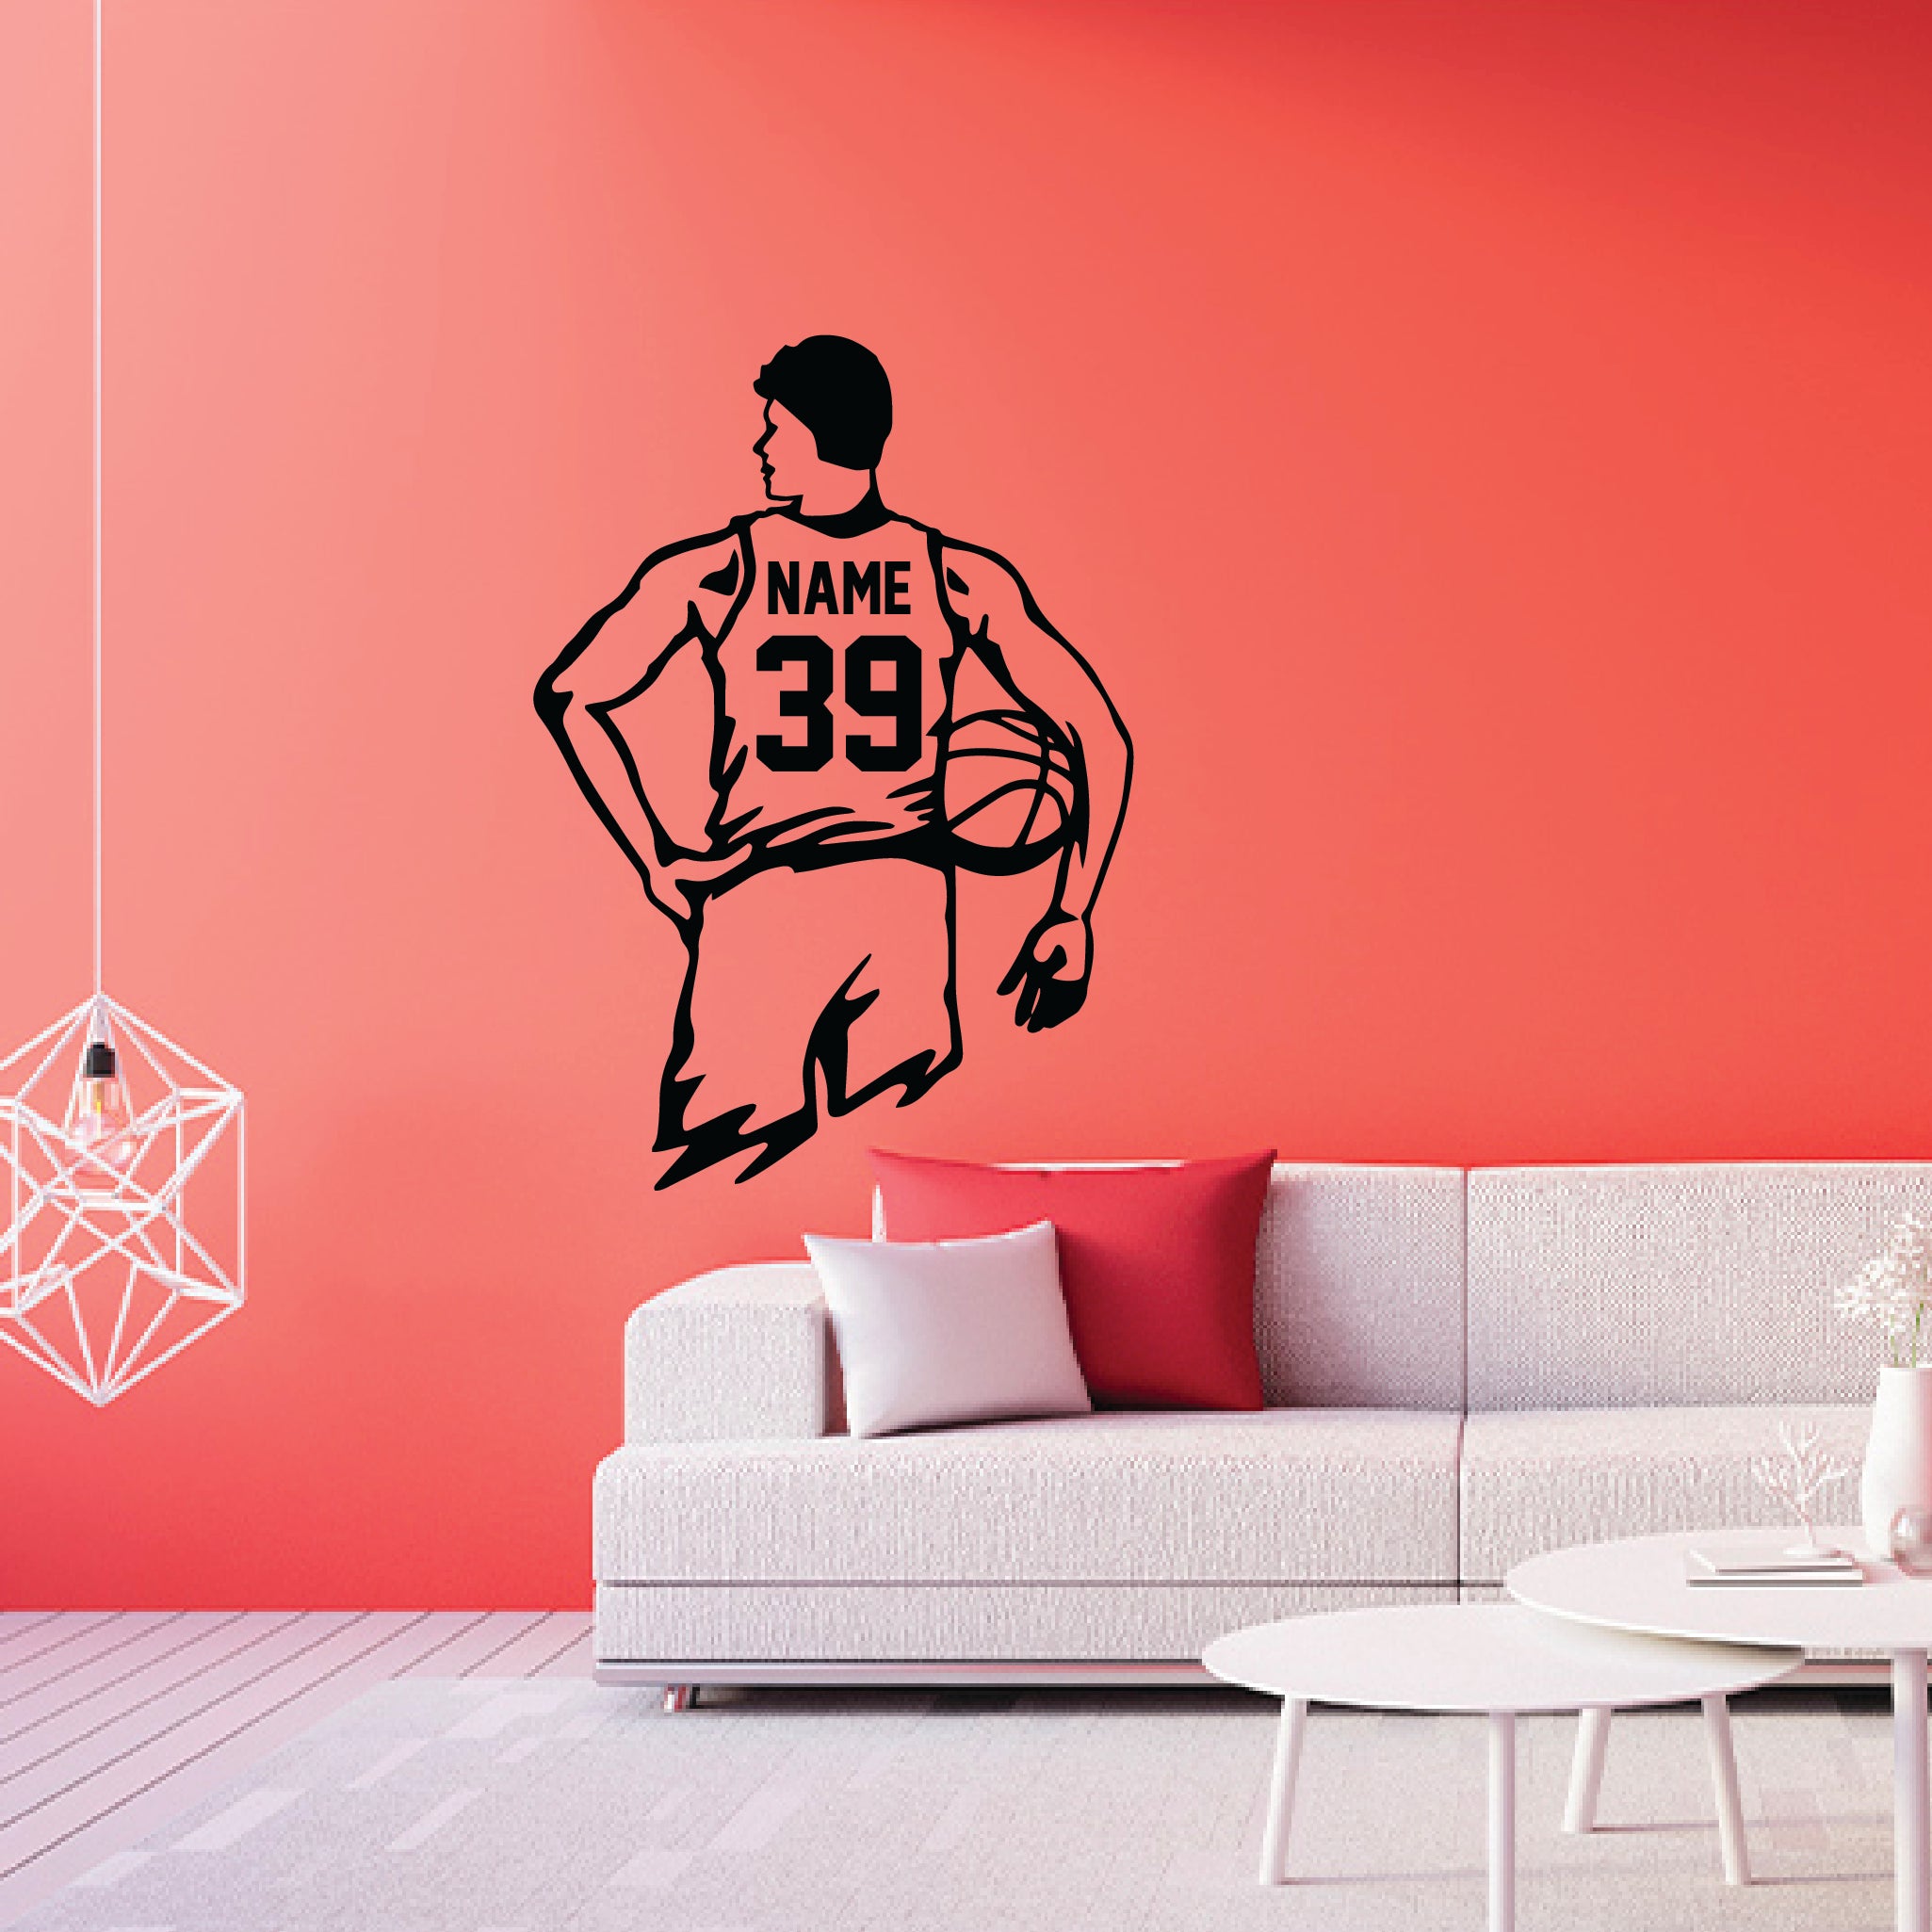 Home Find Football Rugby Vinyl Stickers Player Wall Decals Football Wall Arts Self Adhesive Wallpaper Large Silhouette Peel and Stick Removable Decor - 2